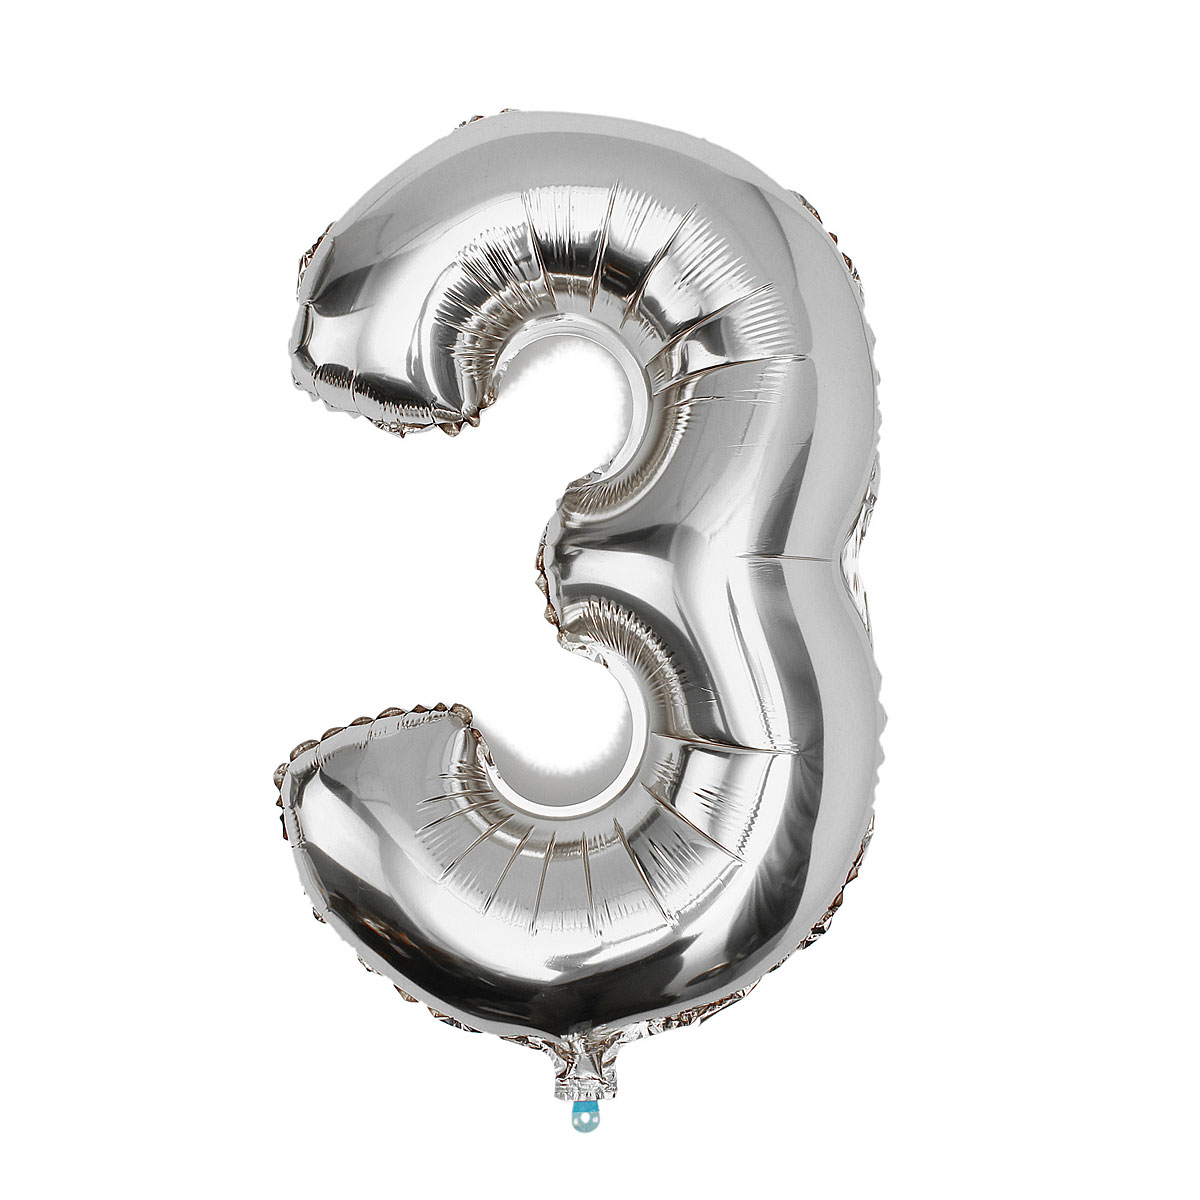 Gold-Silver-Number-Foil-Balloon-Wedding-Birthday-Party-Decoration-971829-5